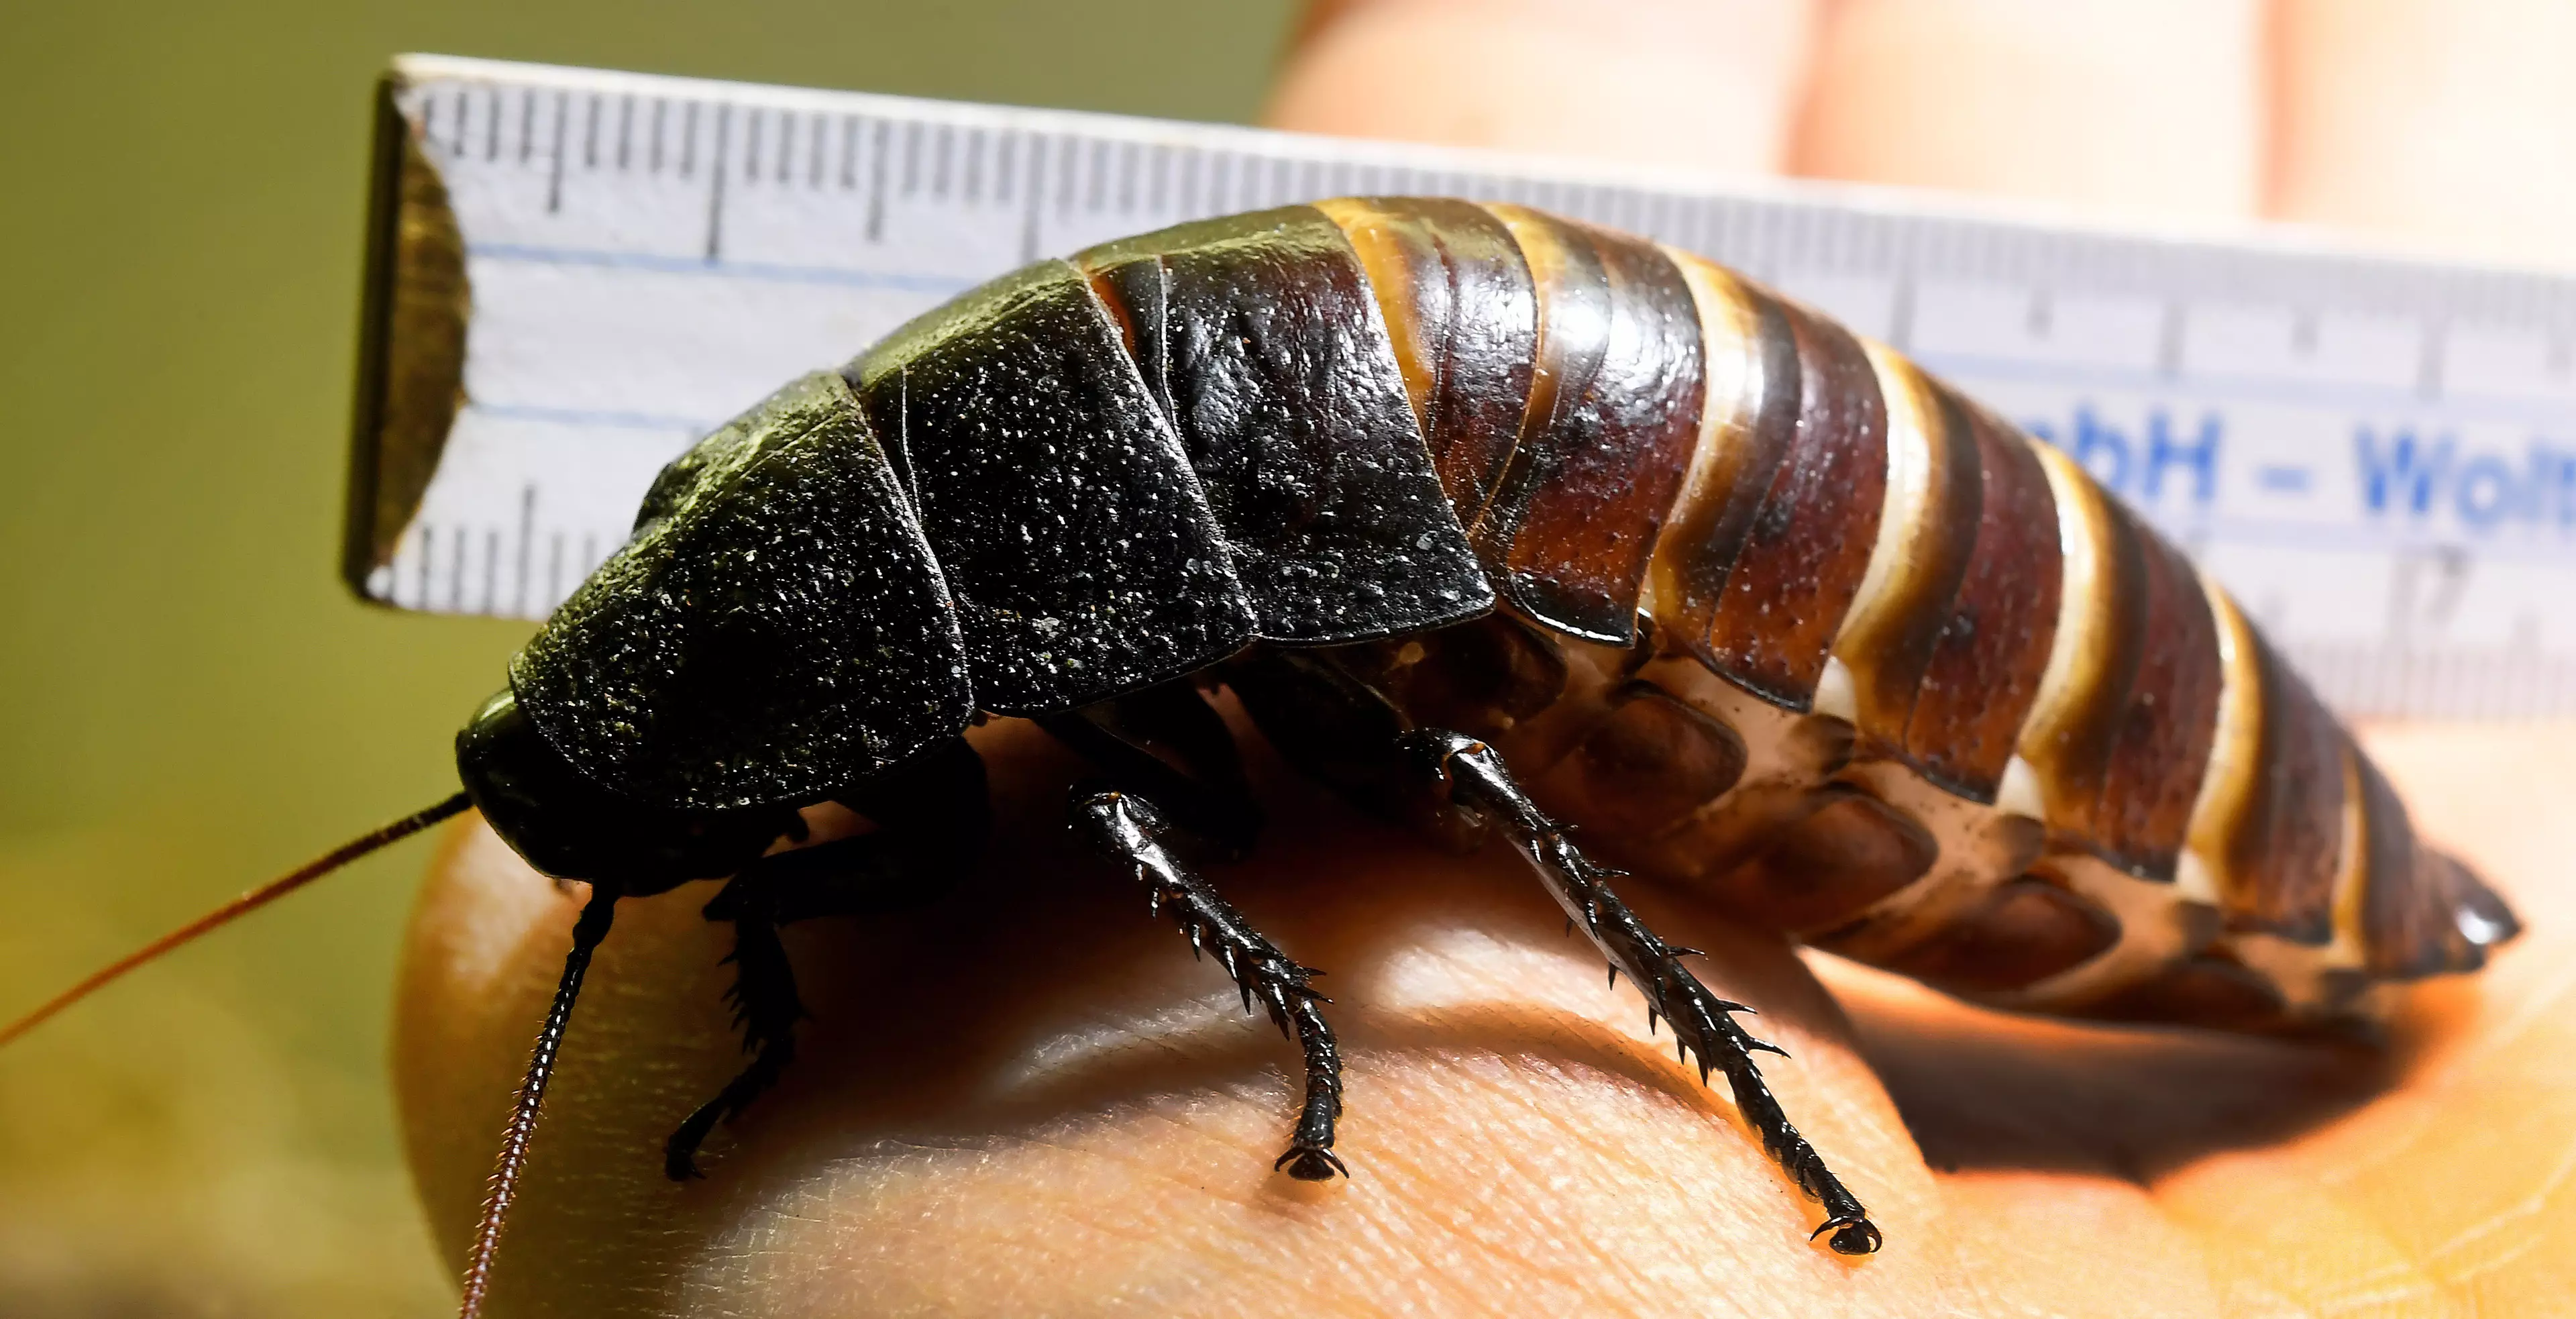 Cockroaches are getting harder to kill with poisons, a study has found.